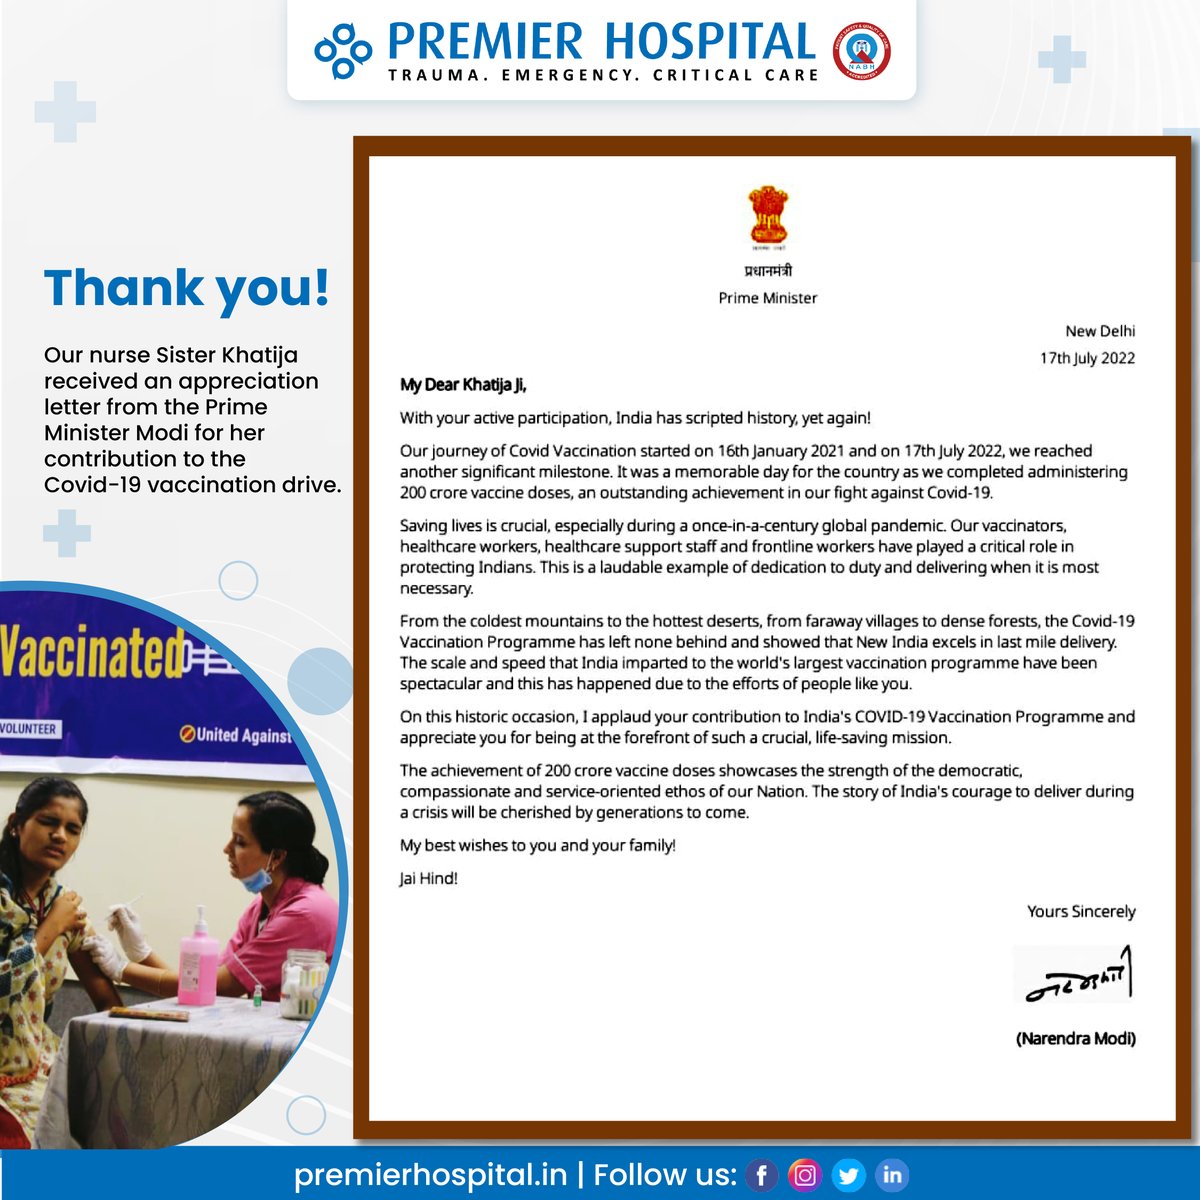 Our nurse Sister Khatija, who played a vital role in the Covid-19 vaccination drive, received an appreciation letter from Prime Minister Modi.

#covid19 #covidvaccination #indiaagianstcovid #covid #pmmodi #narendramodi #primeminister #hyderabadhospital #premierhospital